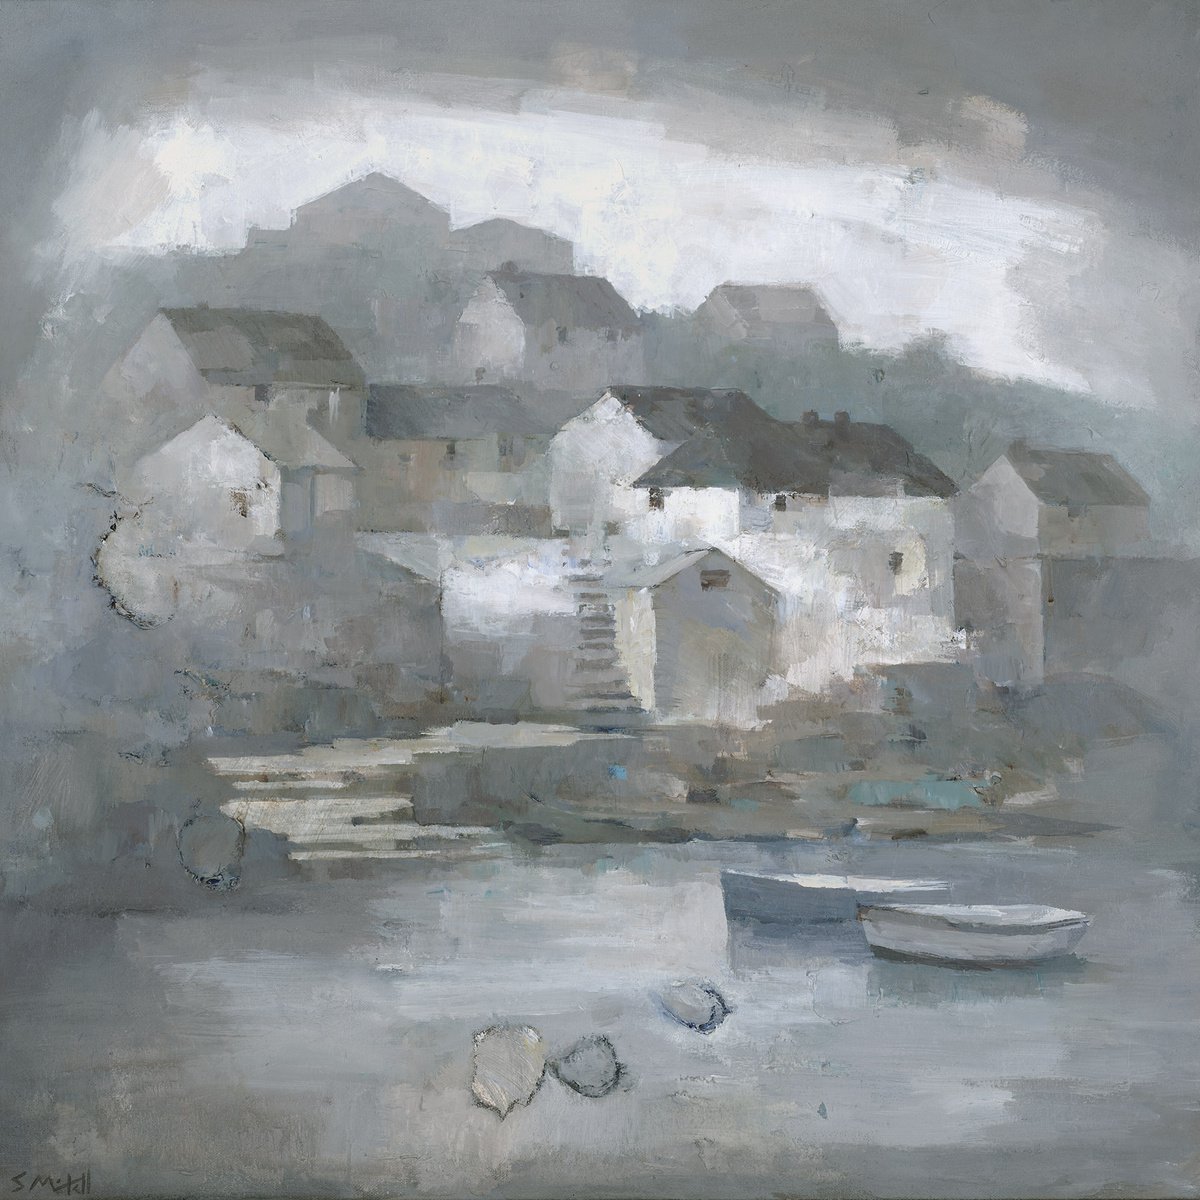 A Coverack Memory by Steve Mitchell